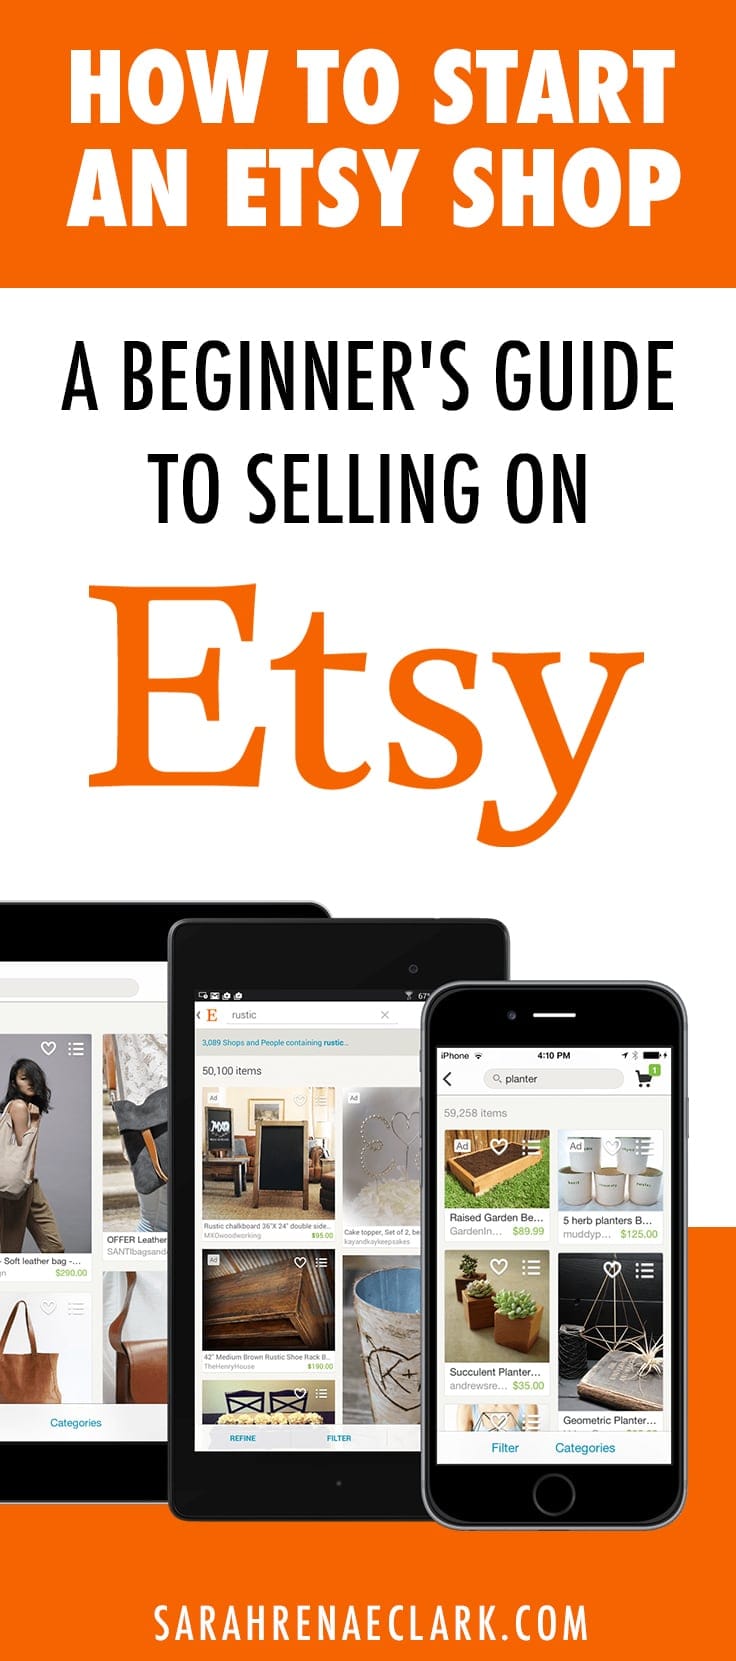 How to start an Etsy shop: A beginner's guide to selling on Etsy